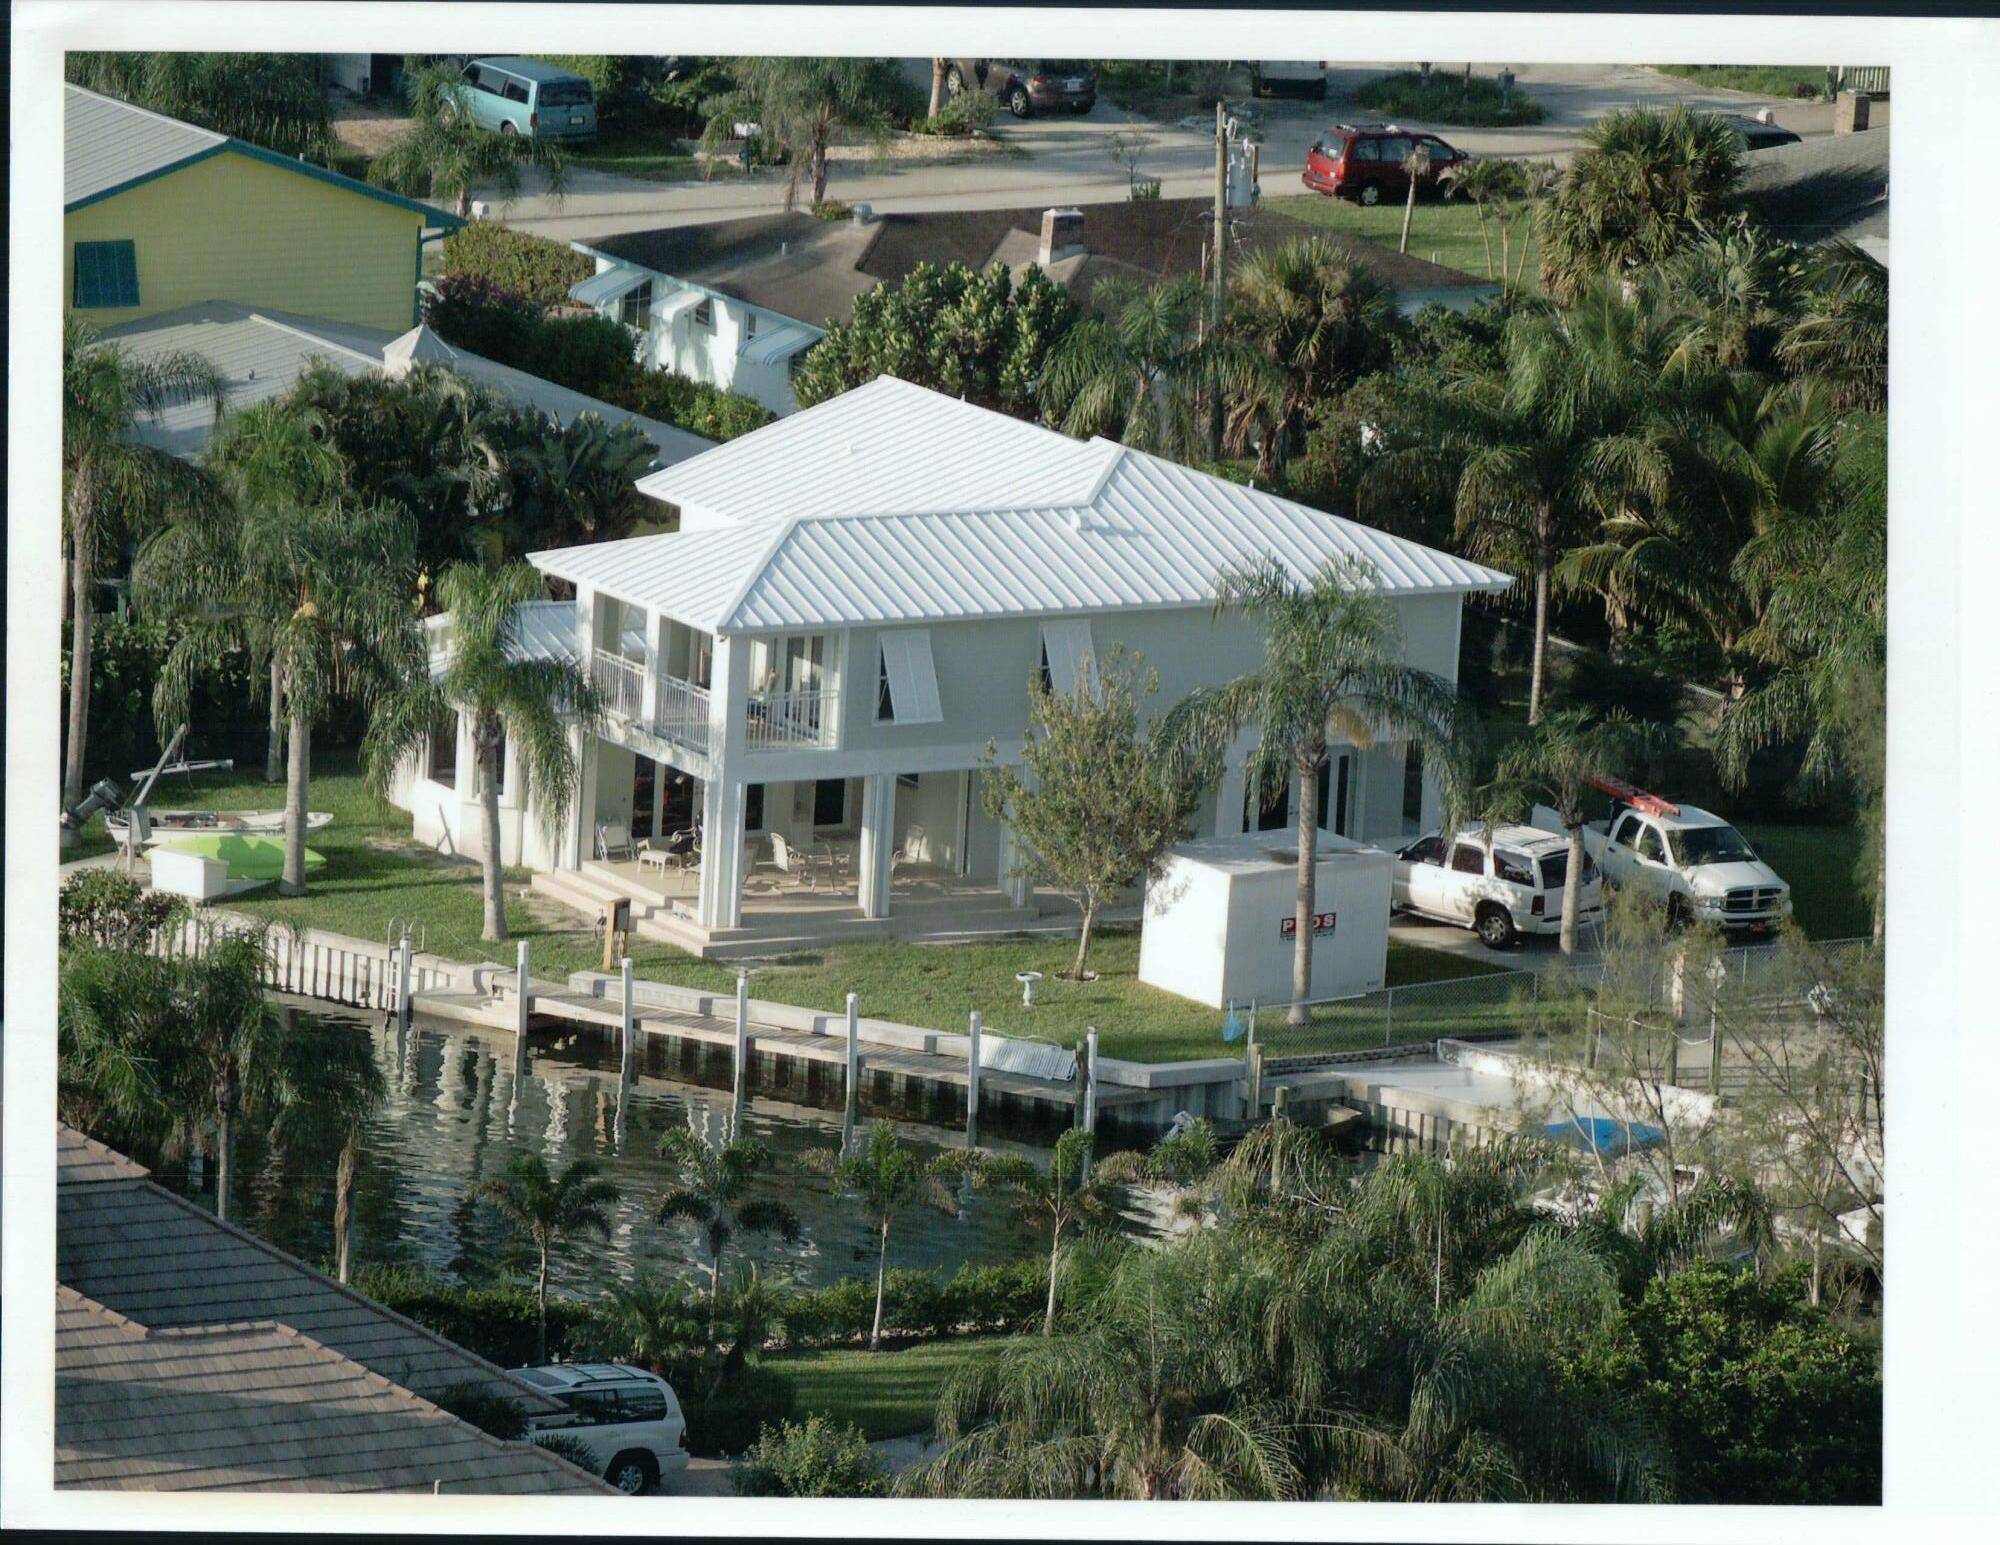 This 2 story Key West style 3 bedroom, 3 bath home situated on a tranquil protected canal just off the intracoastal.